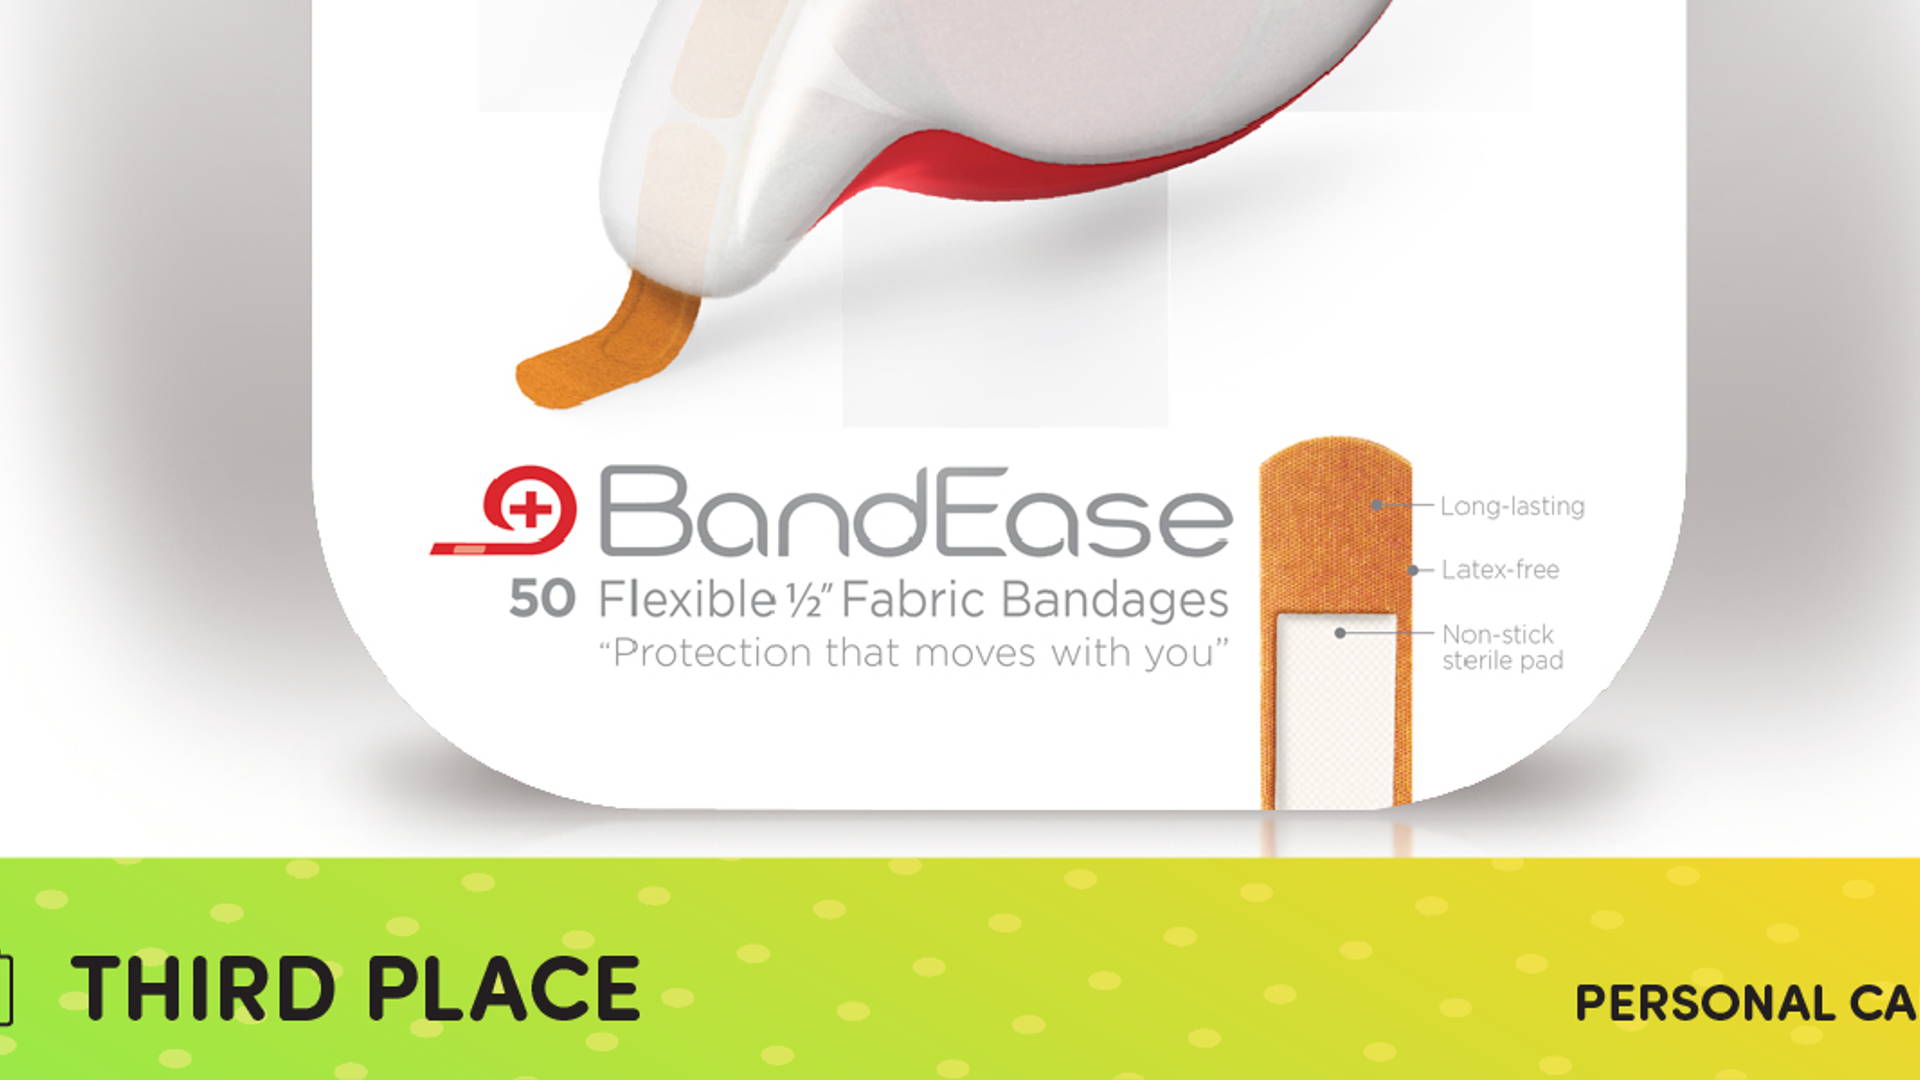 Featured image for 2015 CWWWR AWARD WINNER: 3RD PLACE PERSONAL CARE - BANDEASE INNOVATION